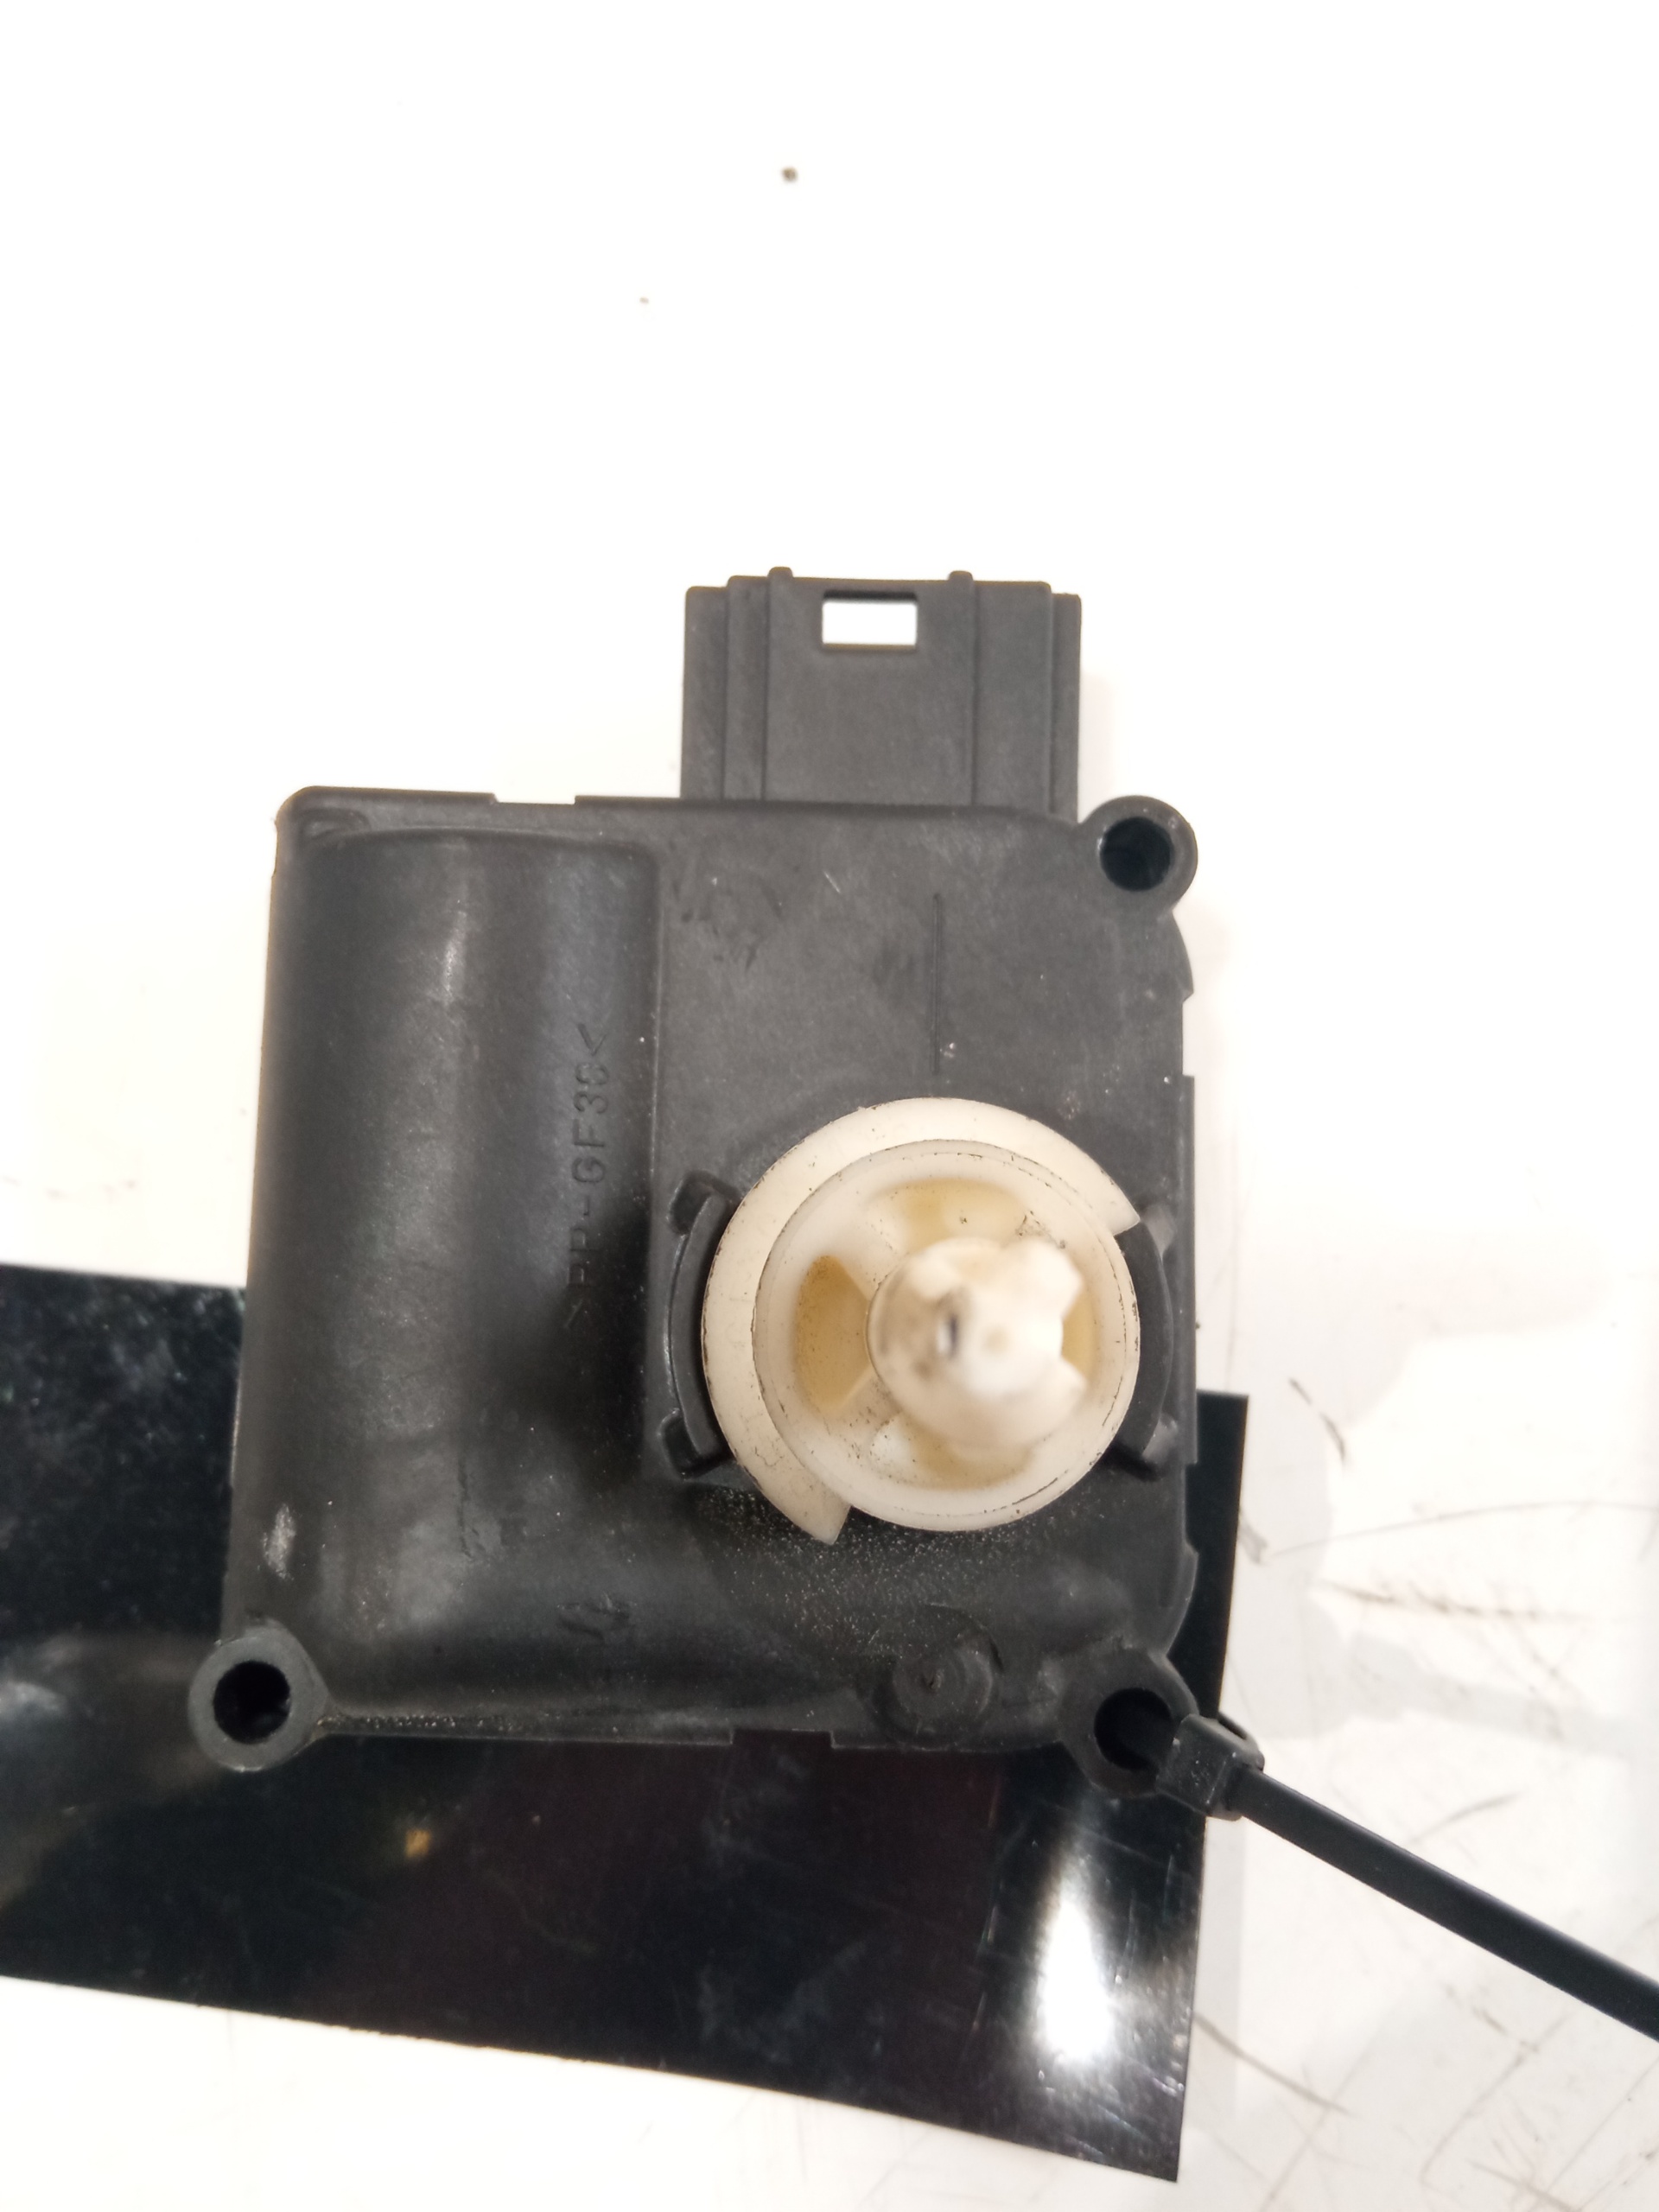 AUDI A6 C6/4F (2004-2011) Air Conditioner Air Flow Valve Motor 4F0820511A, 5PINES 24959137